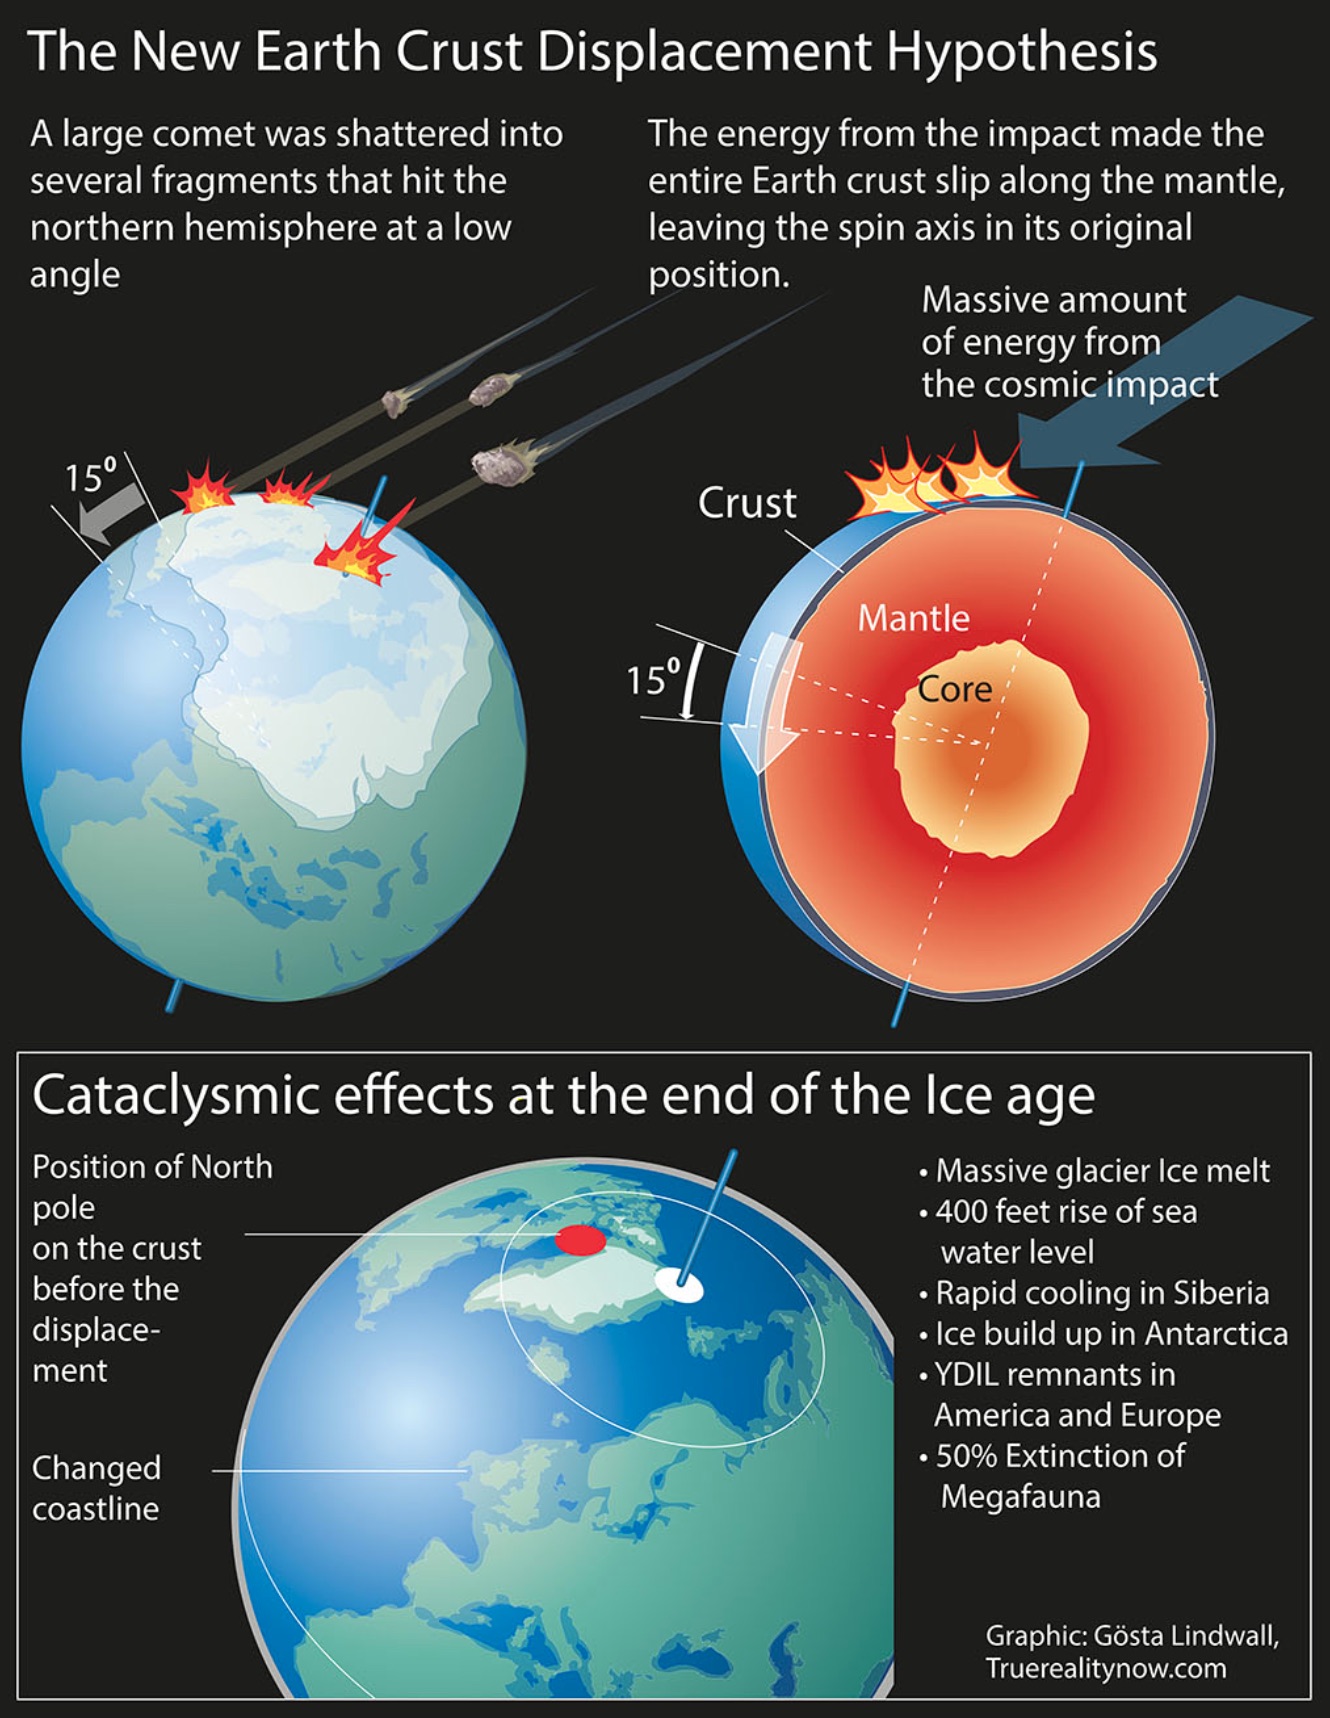 Illustration of the New Earth Crust Displacement Hypothesis